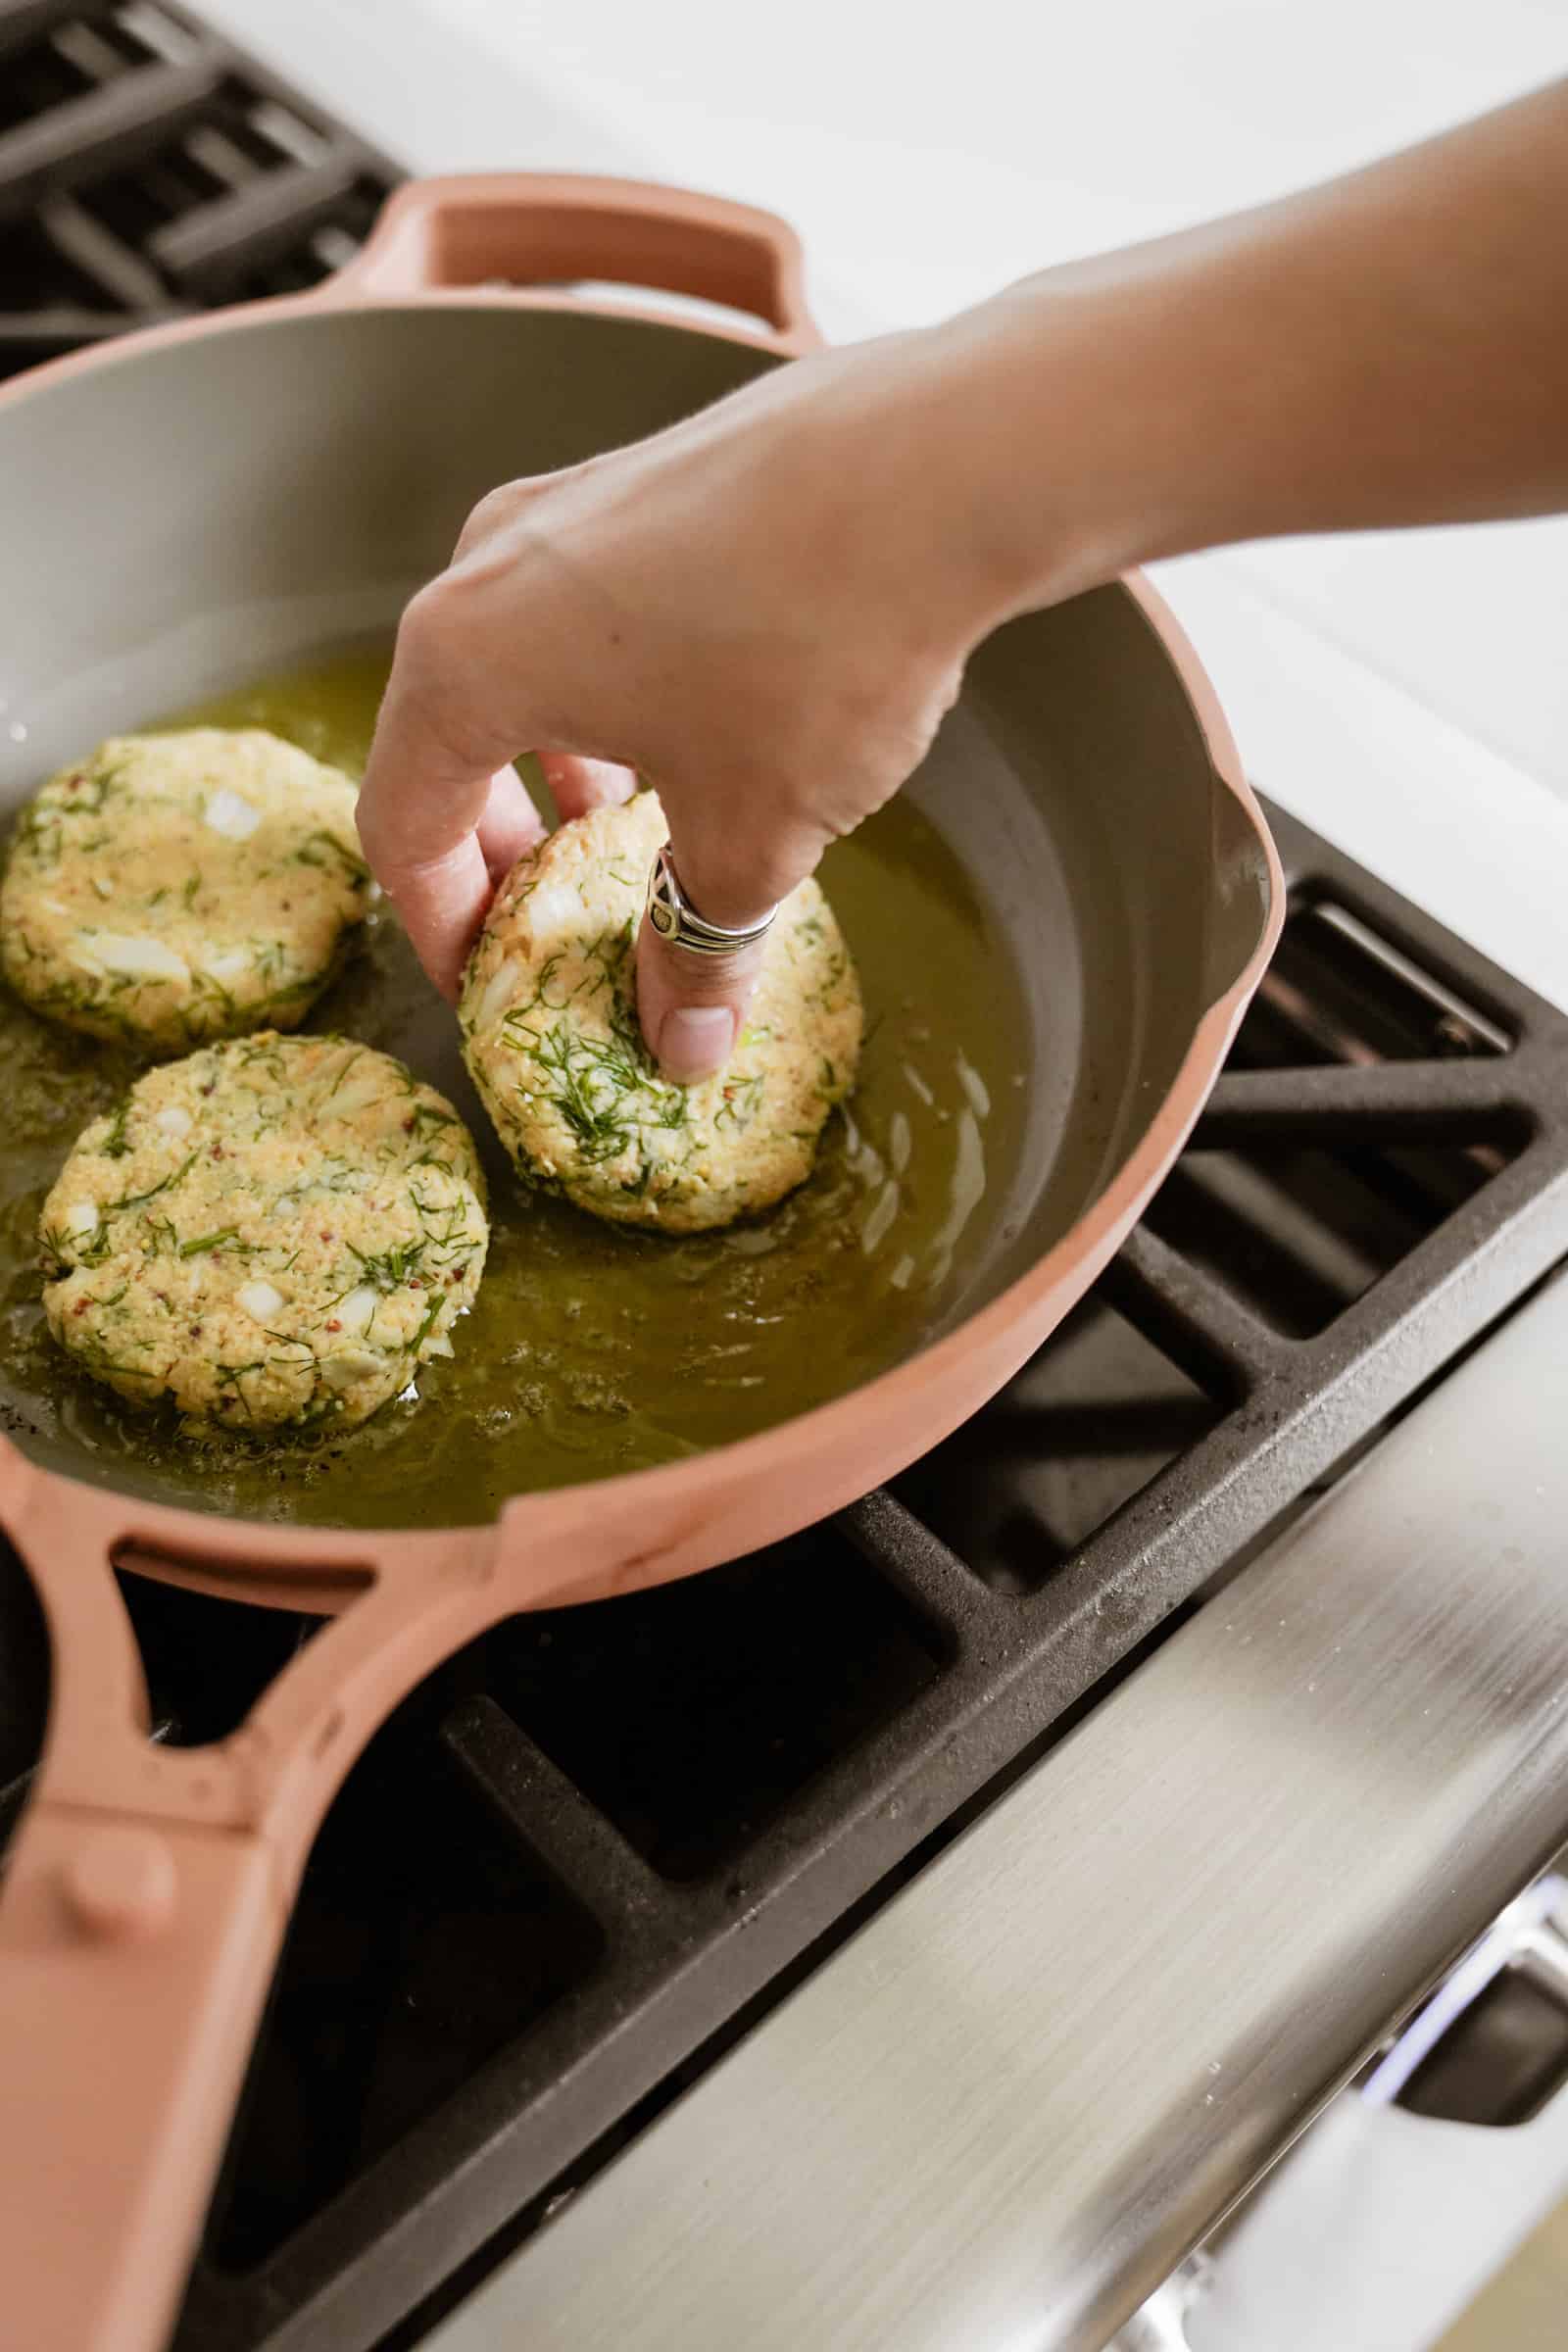 Hand placing crab cake onto a heated pan